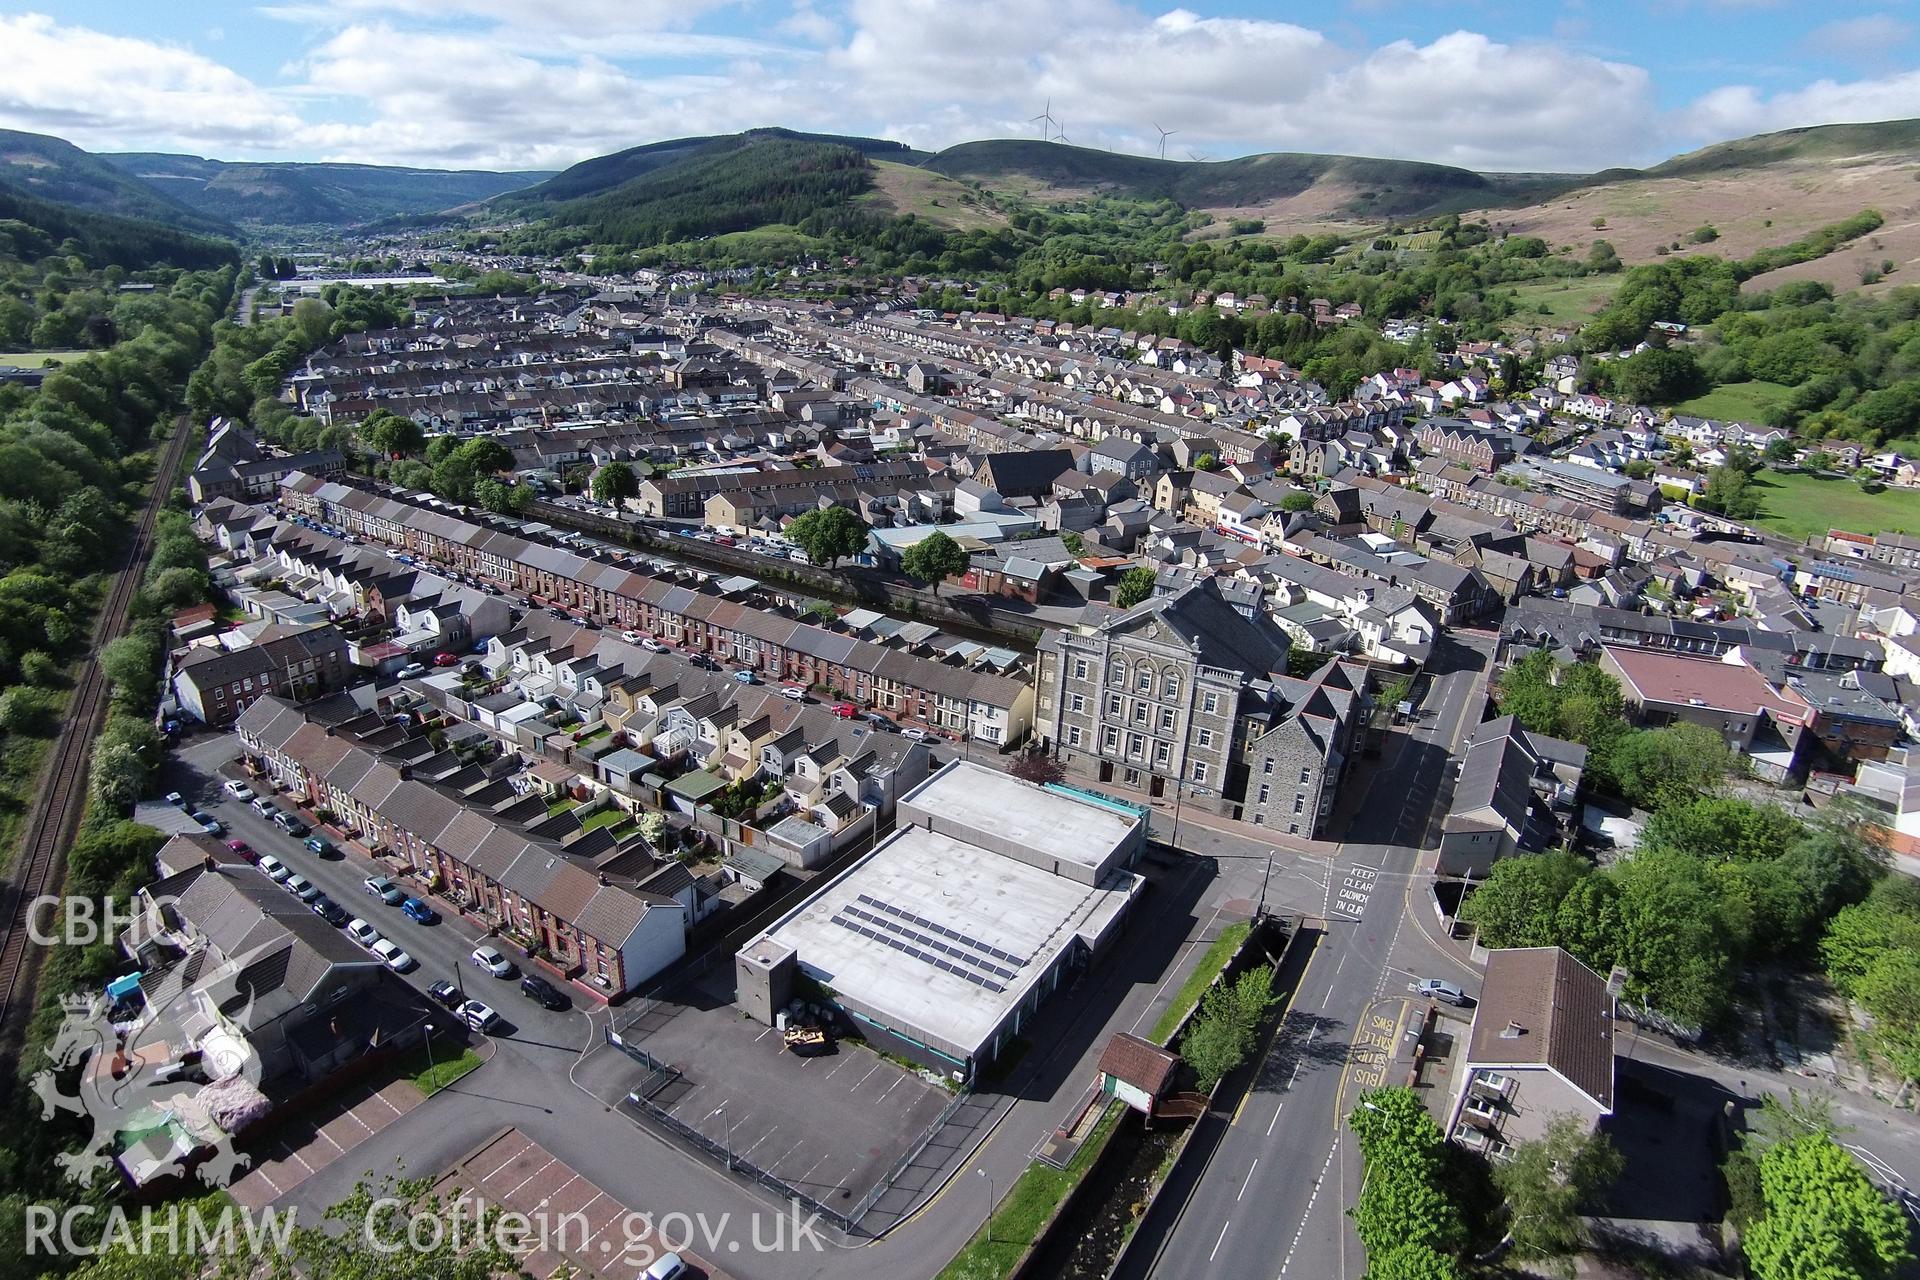 Colour aerial photo showing Treorchy, taken by Paul R. Davis,  24th May 2015